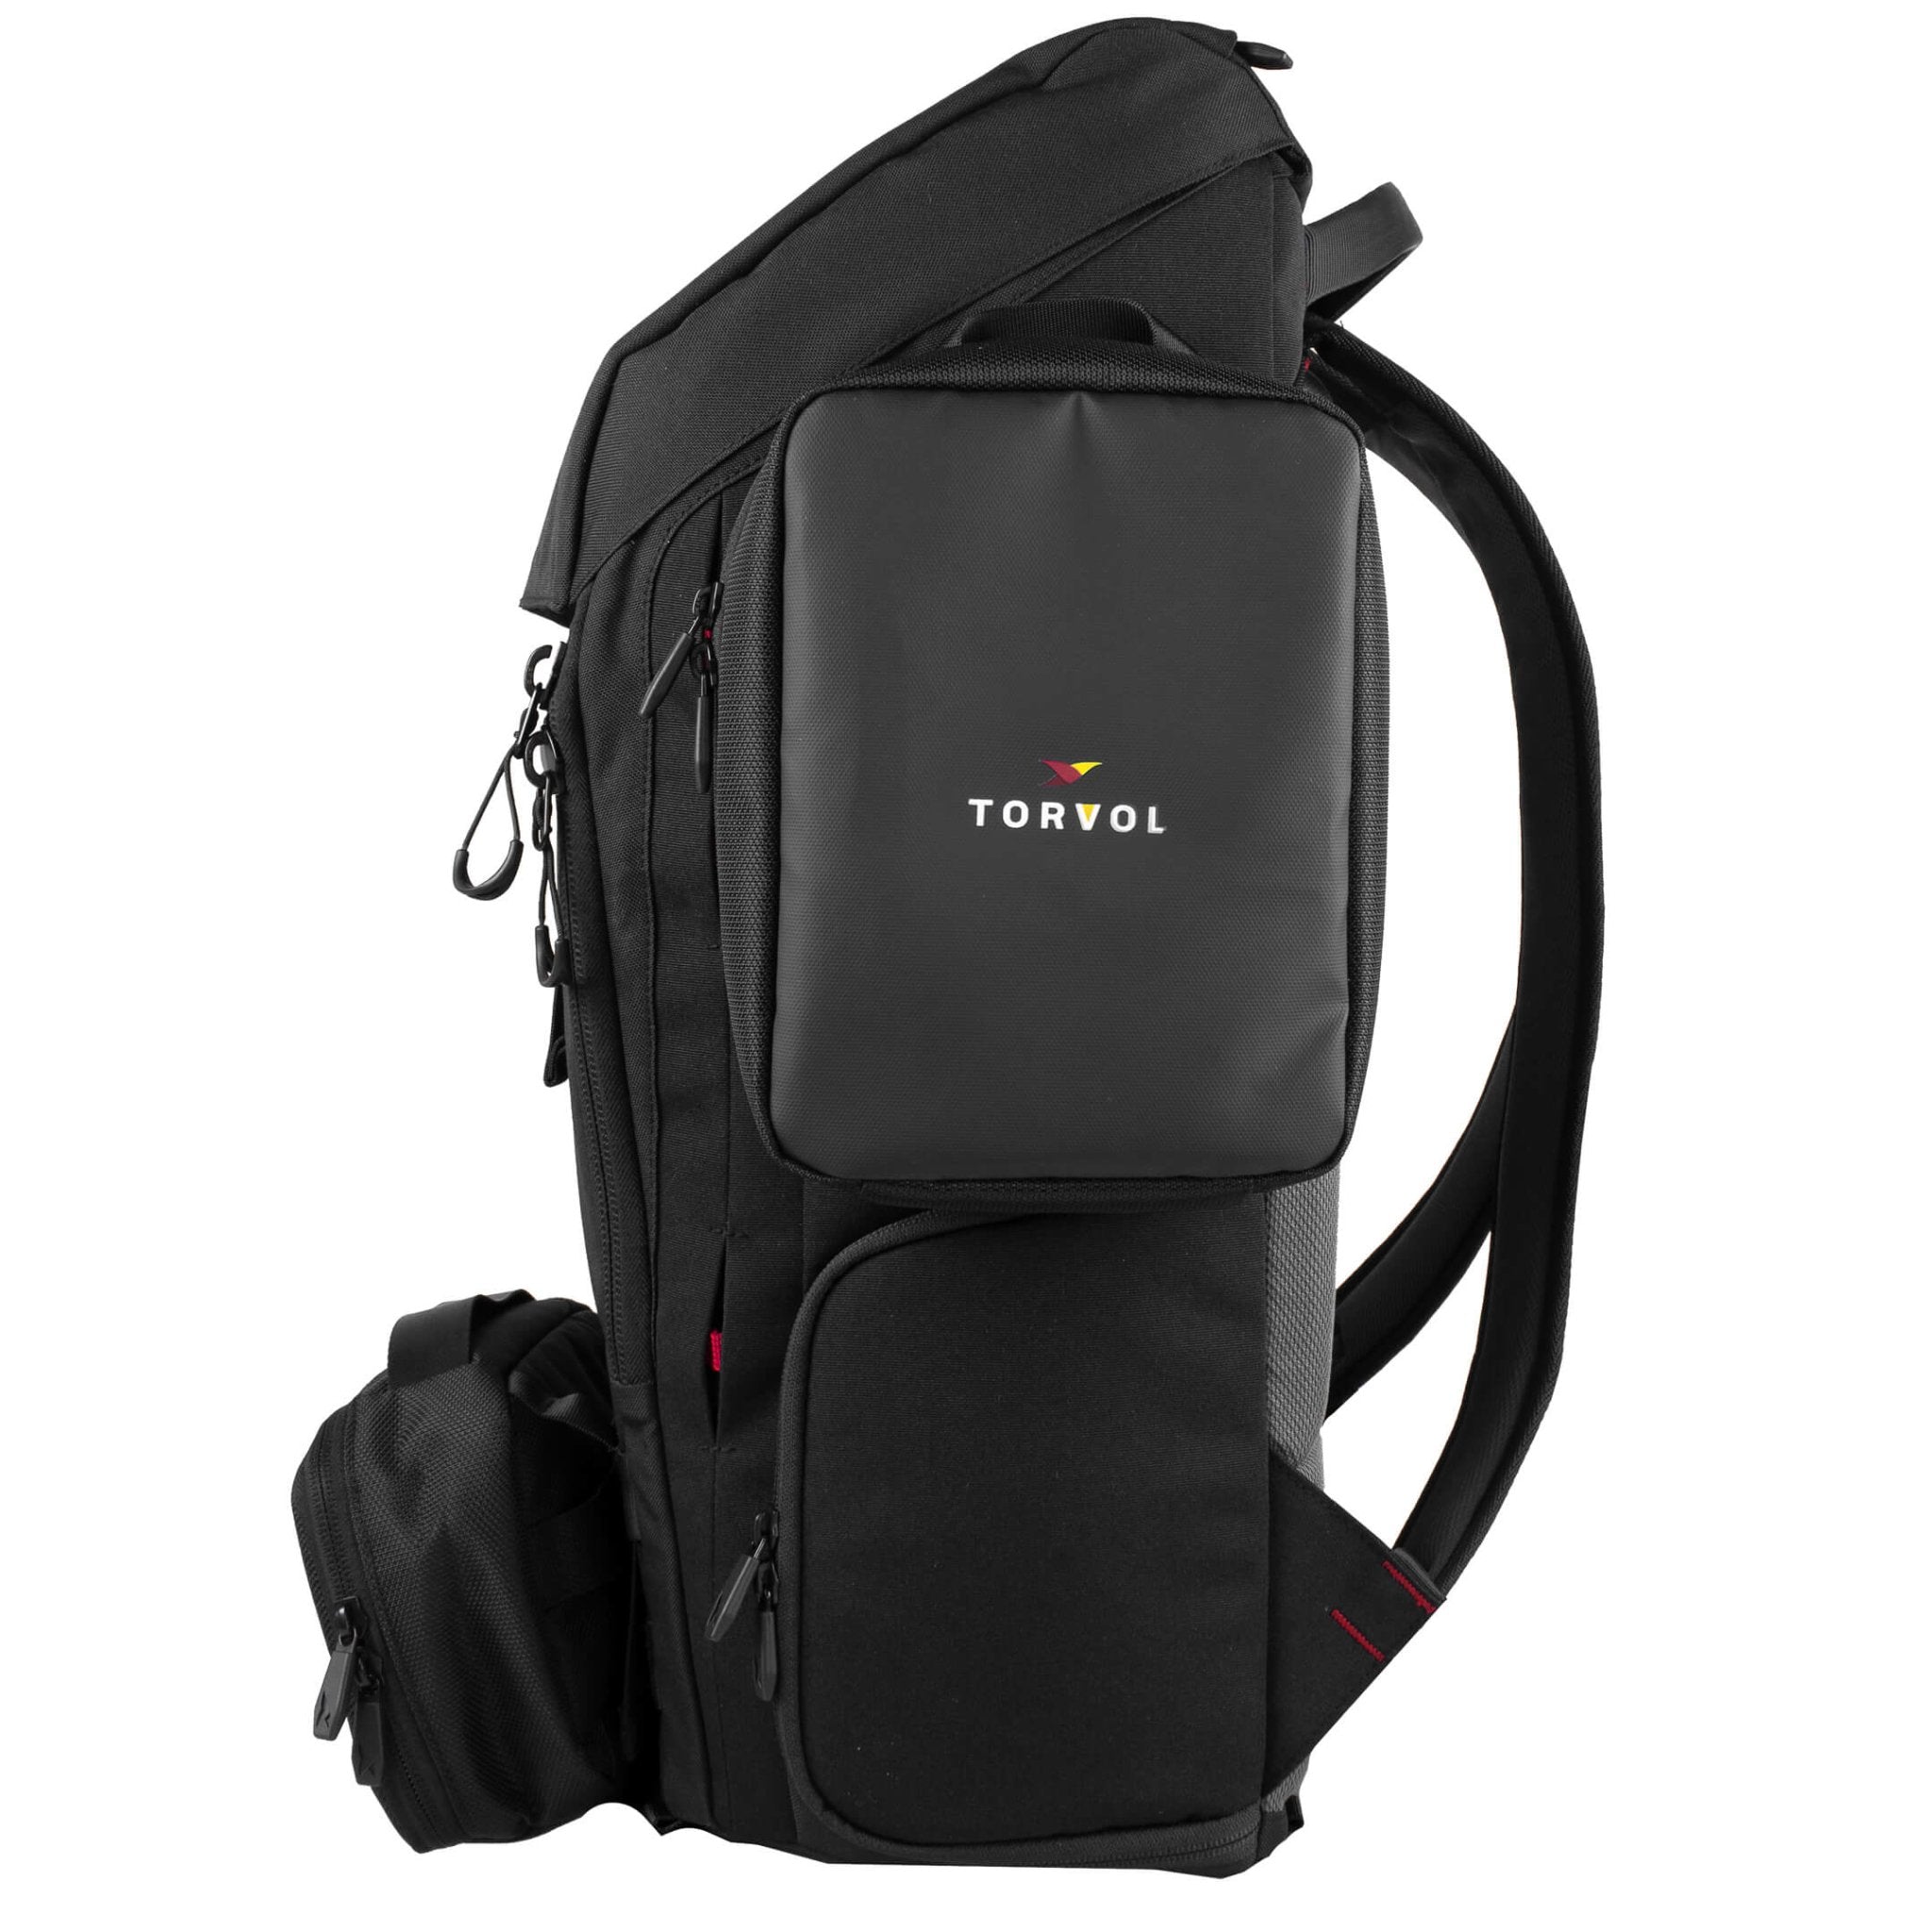 Torvol Urban Carrier Backpack - Your All-Round Freestyle Backpack 7 - Torvol - Drone Authority